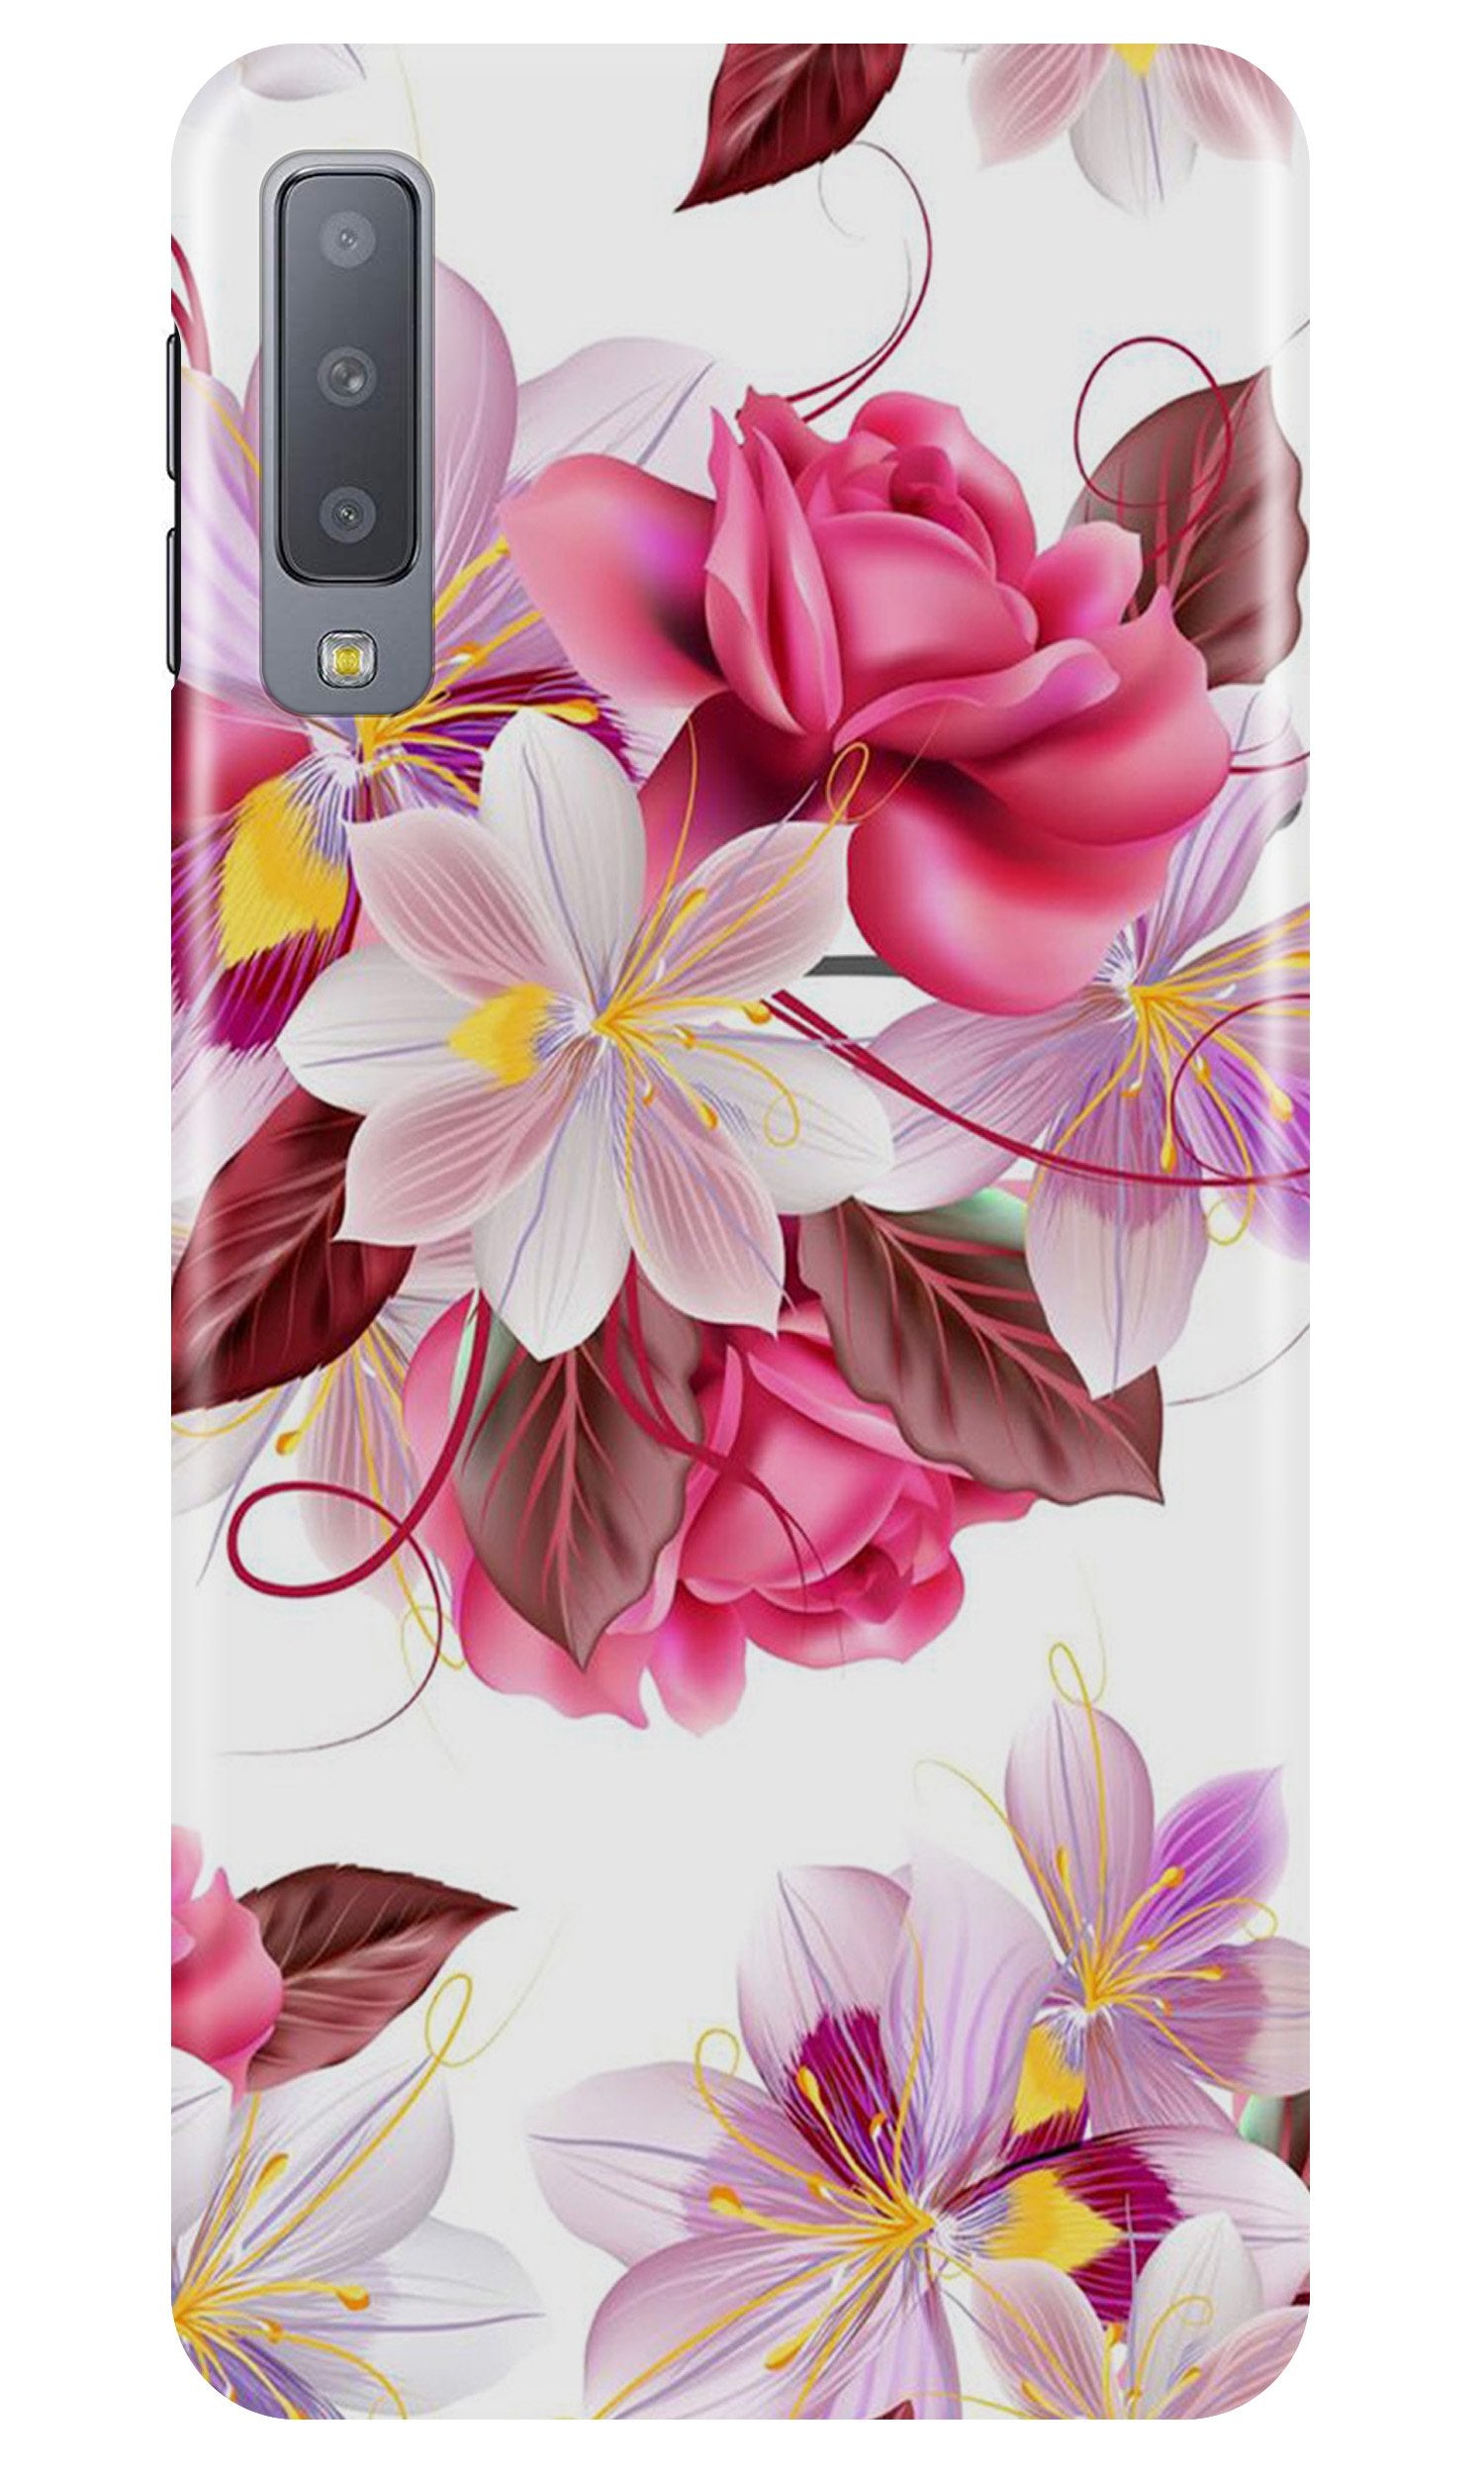 Beautiful flowers Case for Samsung Galaxy A30s